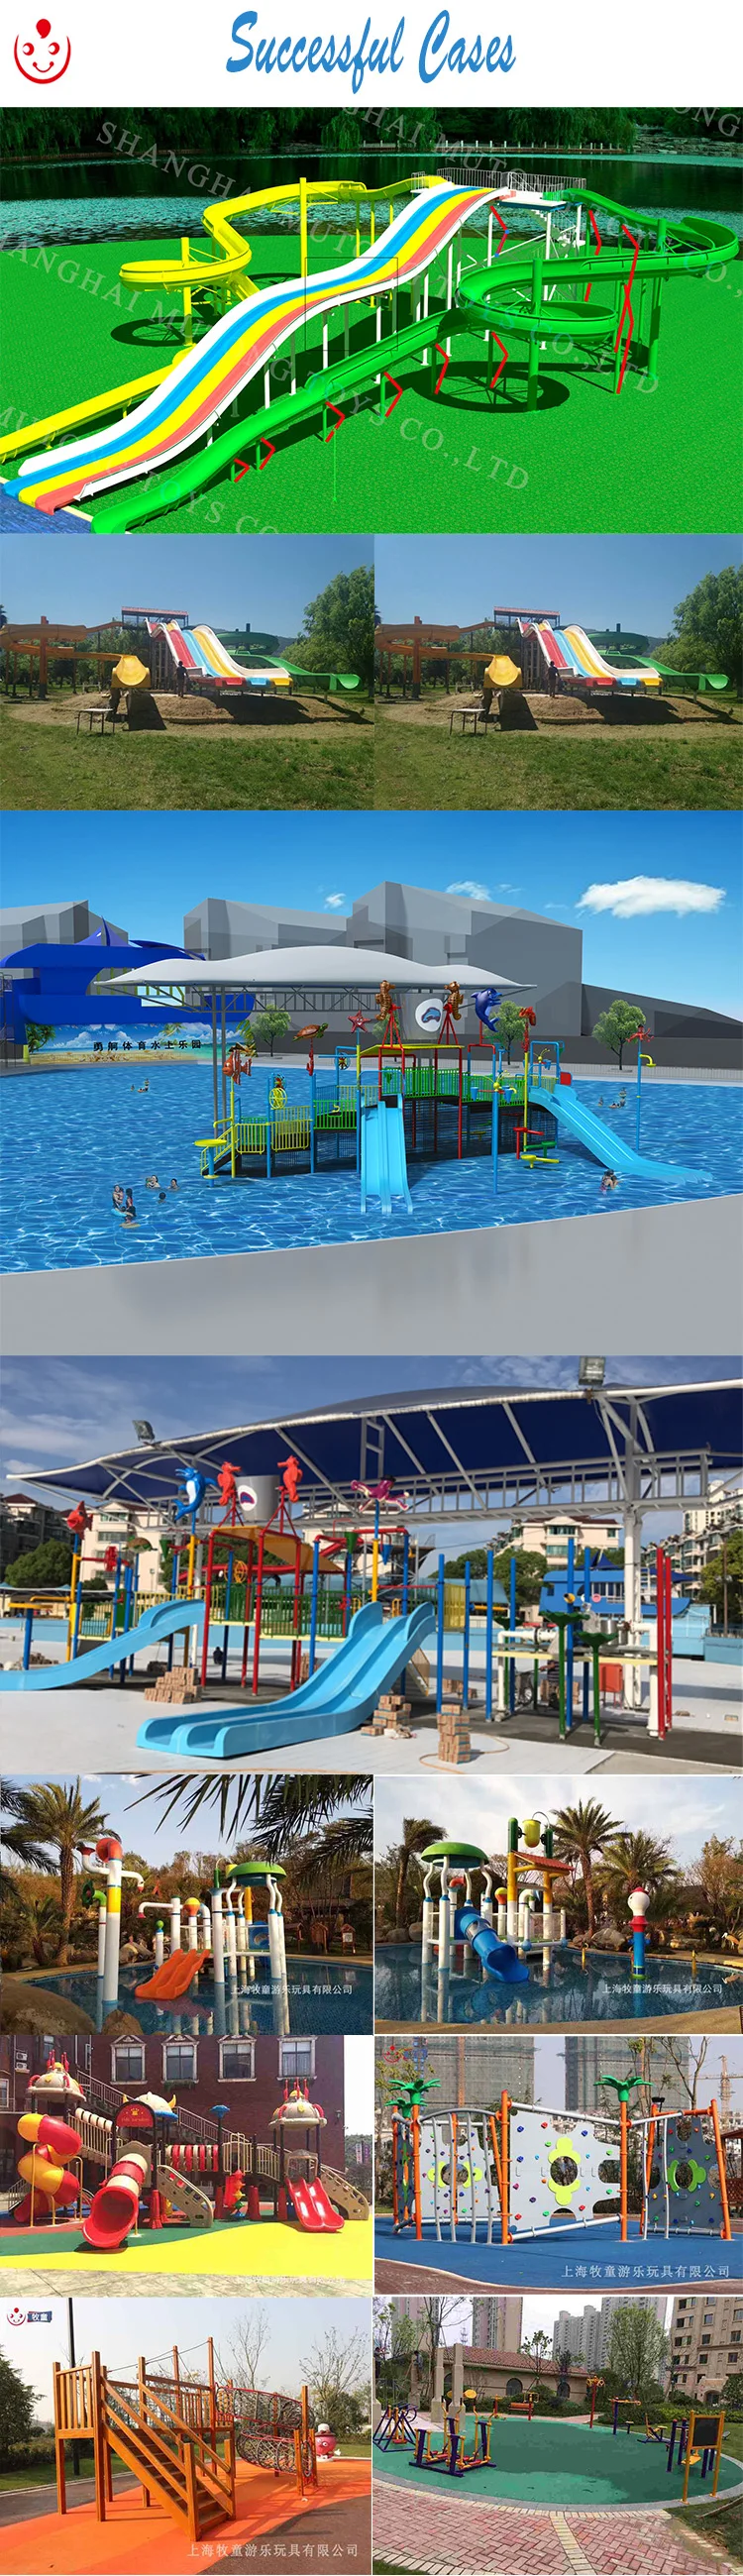 new arrival and factory price water house playground for swimming pool